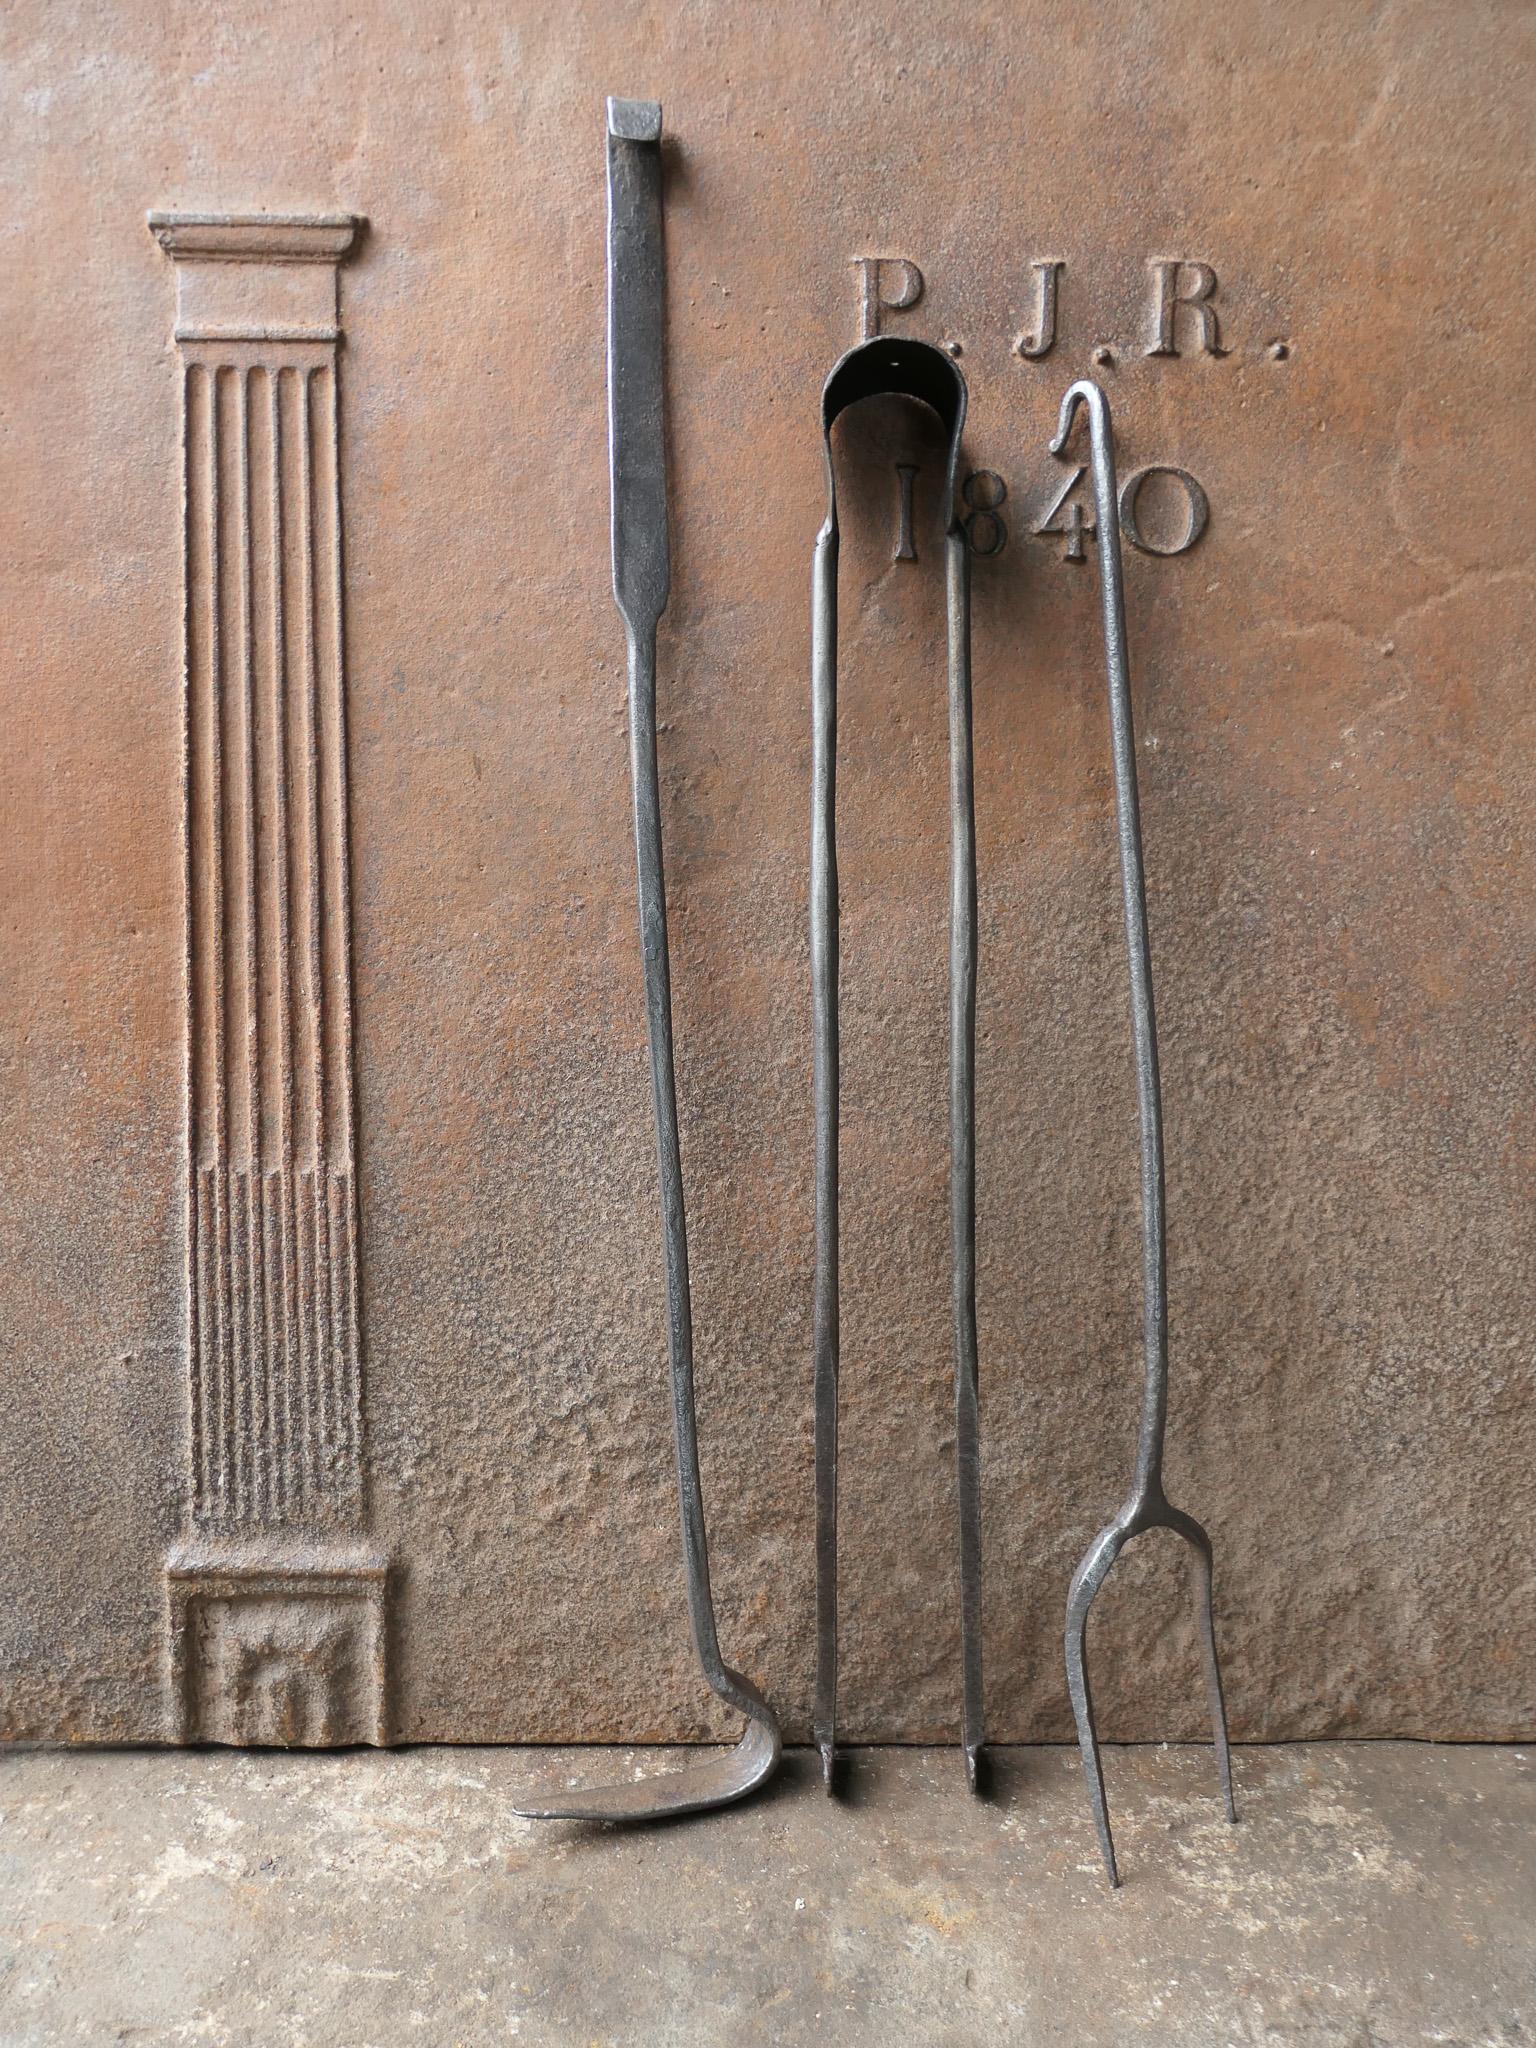 17th - 18th century French Louis XIV fireplace toolset. The toolset, consisting of tongs, a shovel and a poker, is made of wrought iron. It is in a good condition and it is fully functional.








